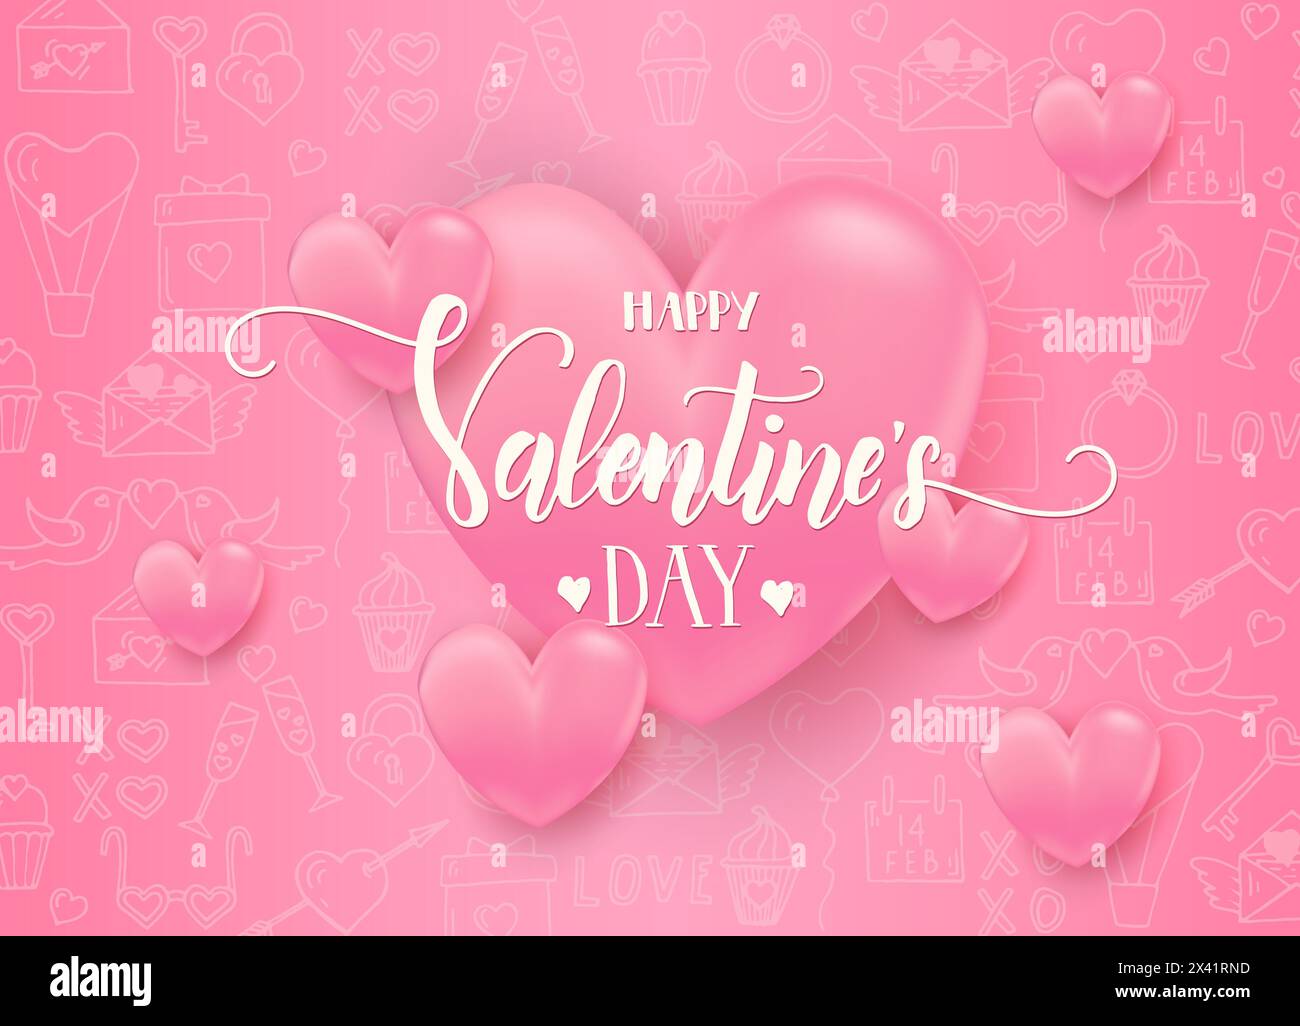 Valentines day background with 3d pink hearts on pink pattern with hand drawn love line art symbols.  Happy Valentines Day - Lettering calligraphy phr Stock Vector